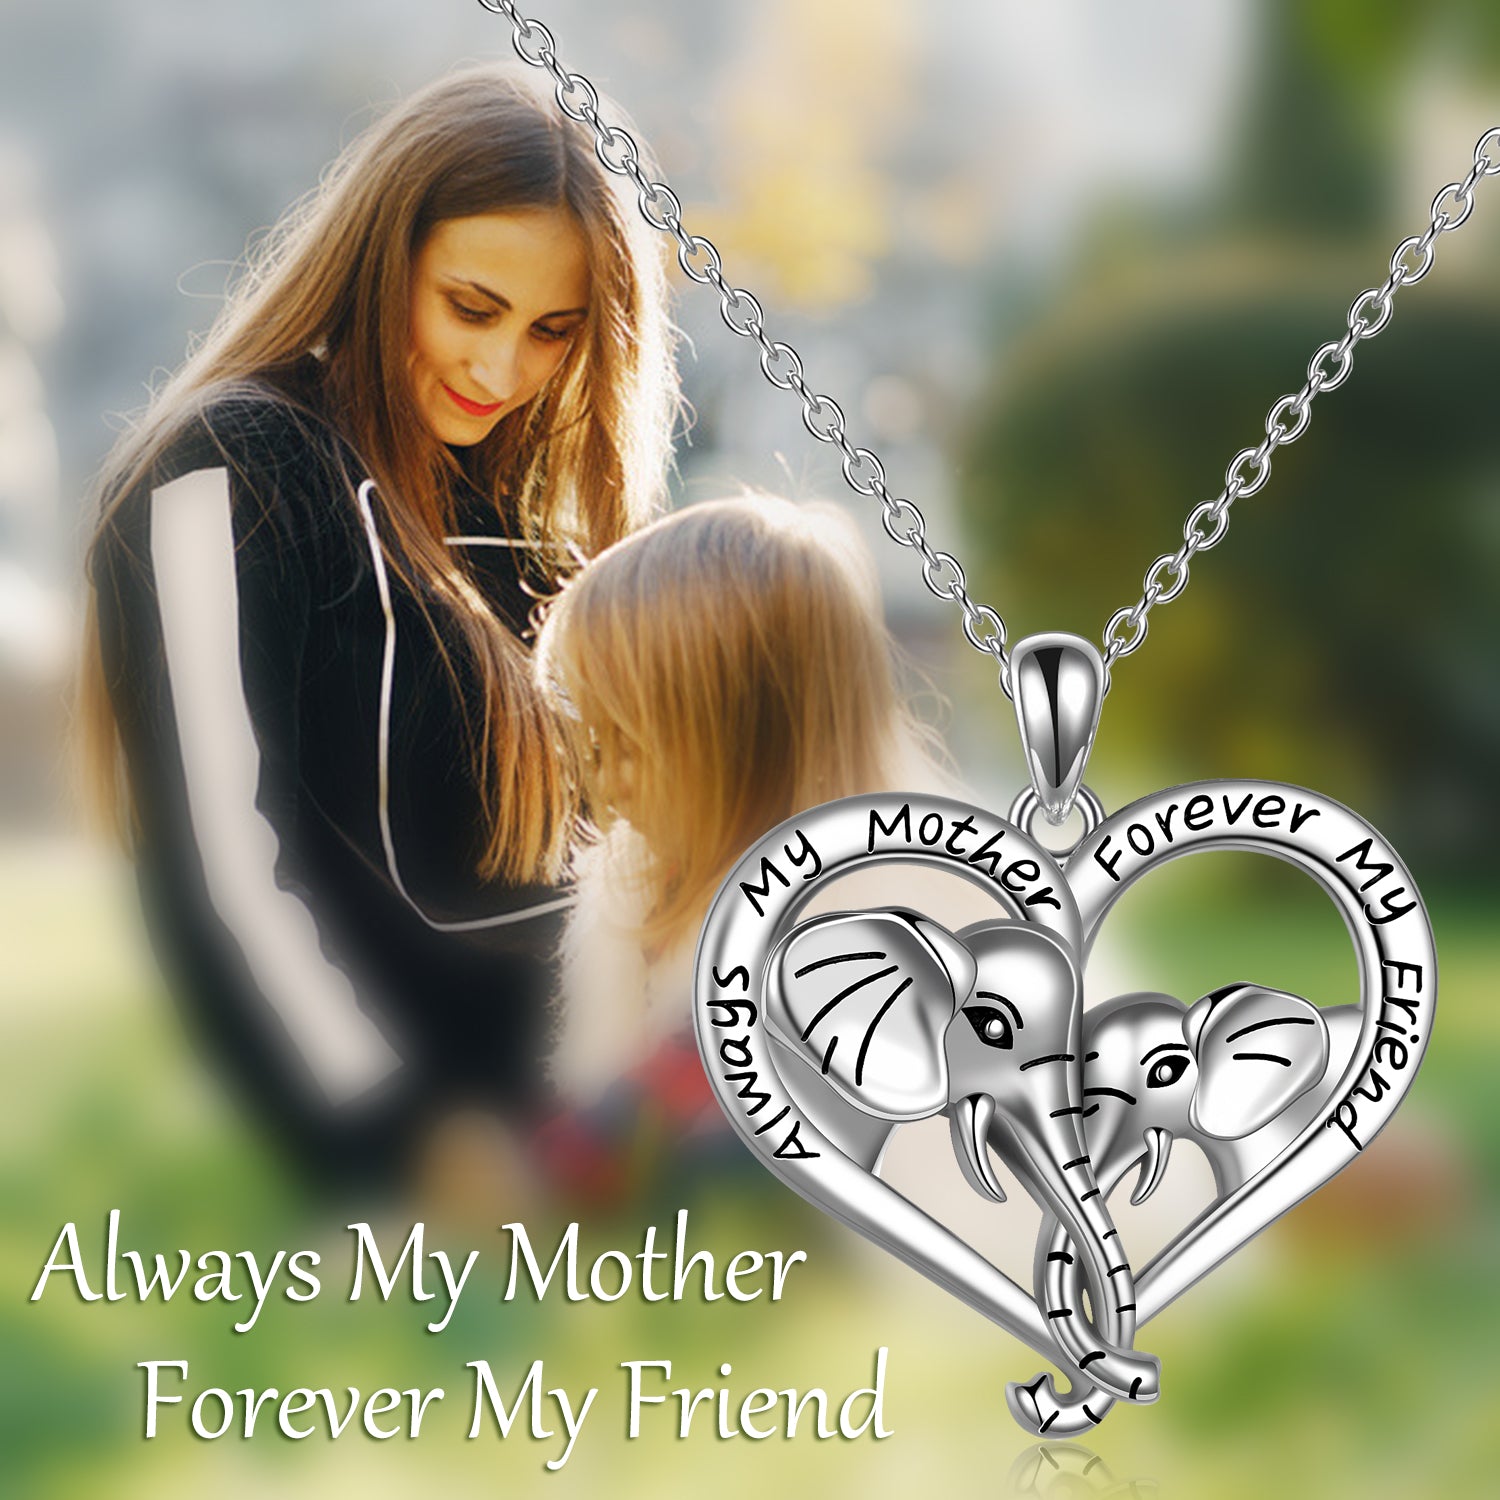 Mama elephant and baby elephant tied noses together, which represents the maternal love and harmonious relationship between mother and daughter. It engraved "Always My Mother Forever My Friend". Perfect mother daughter necklace for animal lovers.